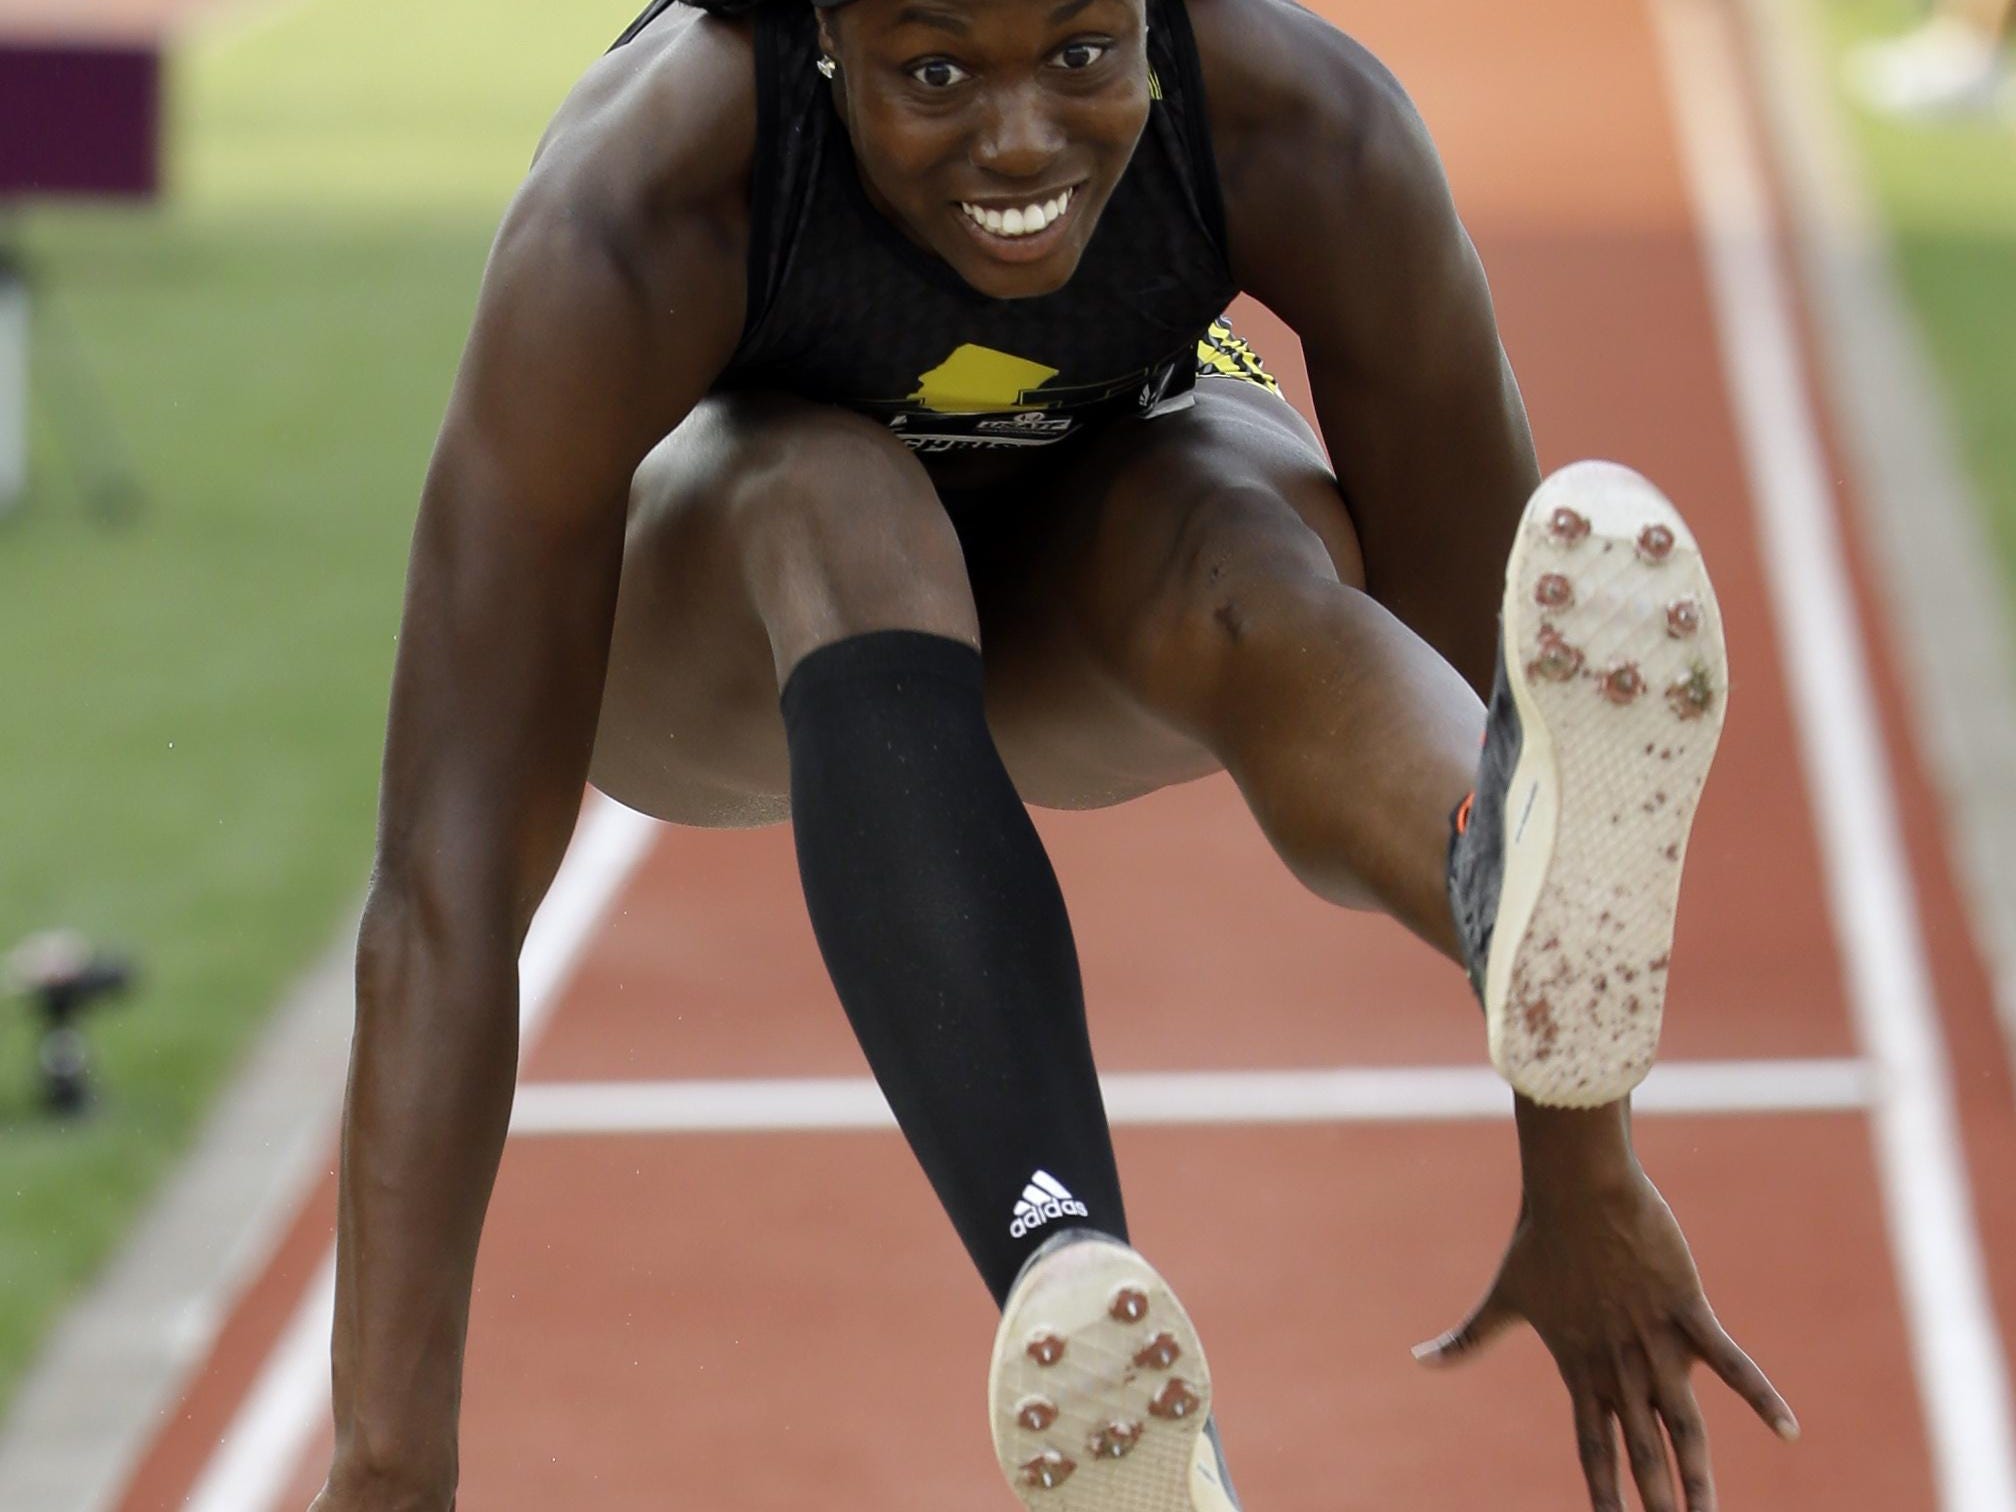 Christina Epps of Morristown competes in the triple jump at USA Track and Field’s Outdoor Championships in Eugene, Ore., on June 26. (AP Photo/Don Ryan)